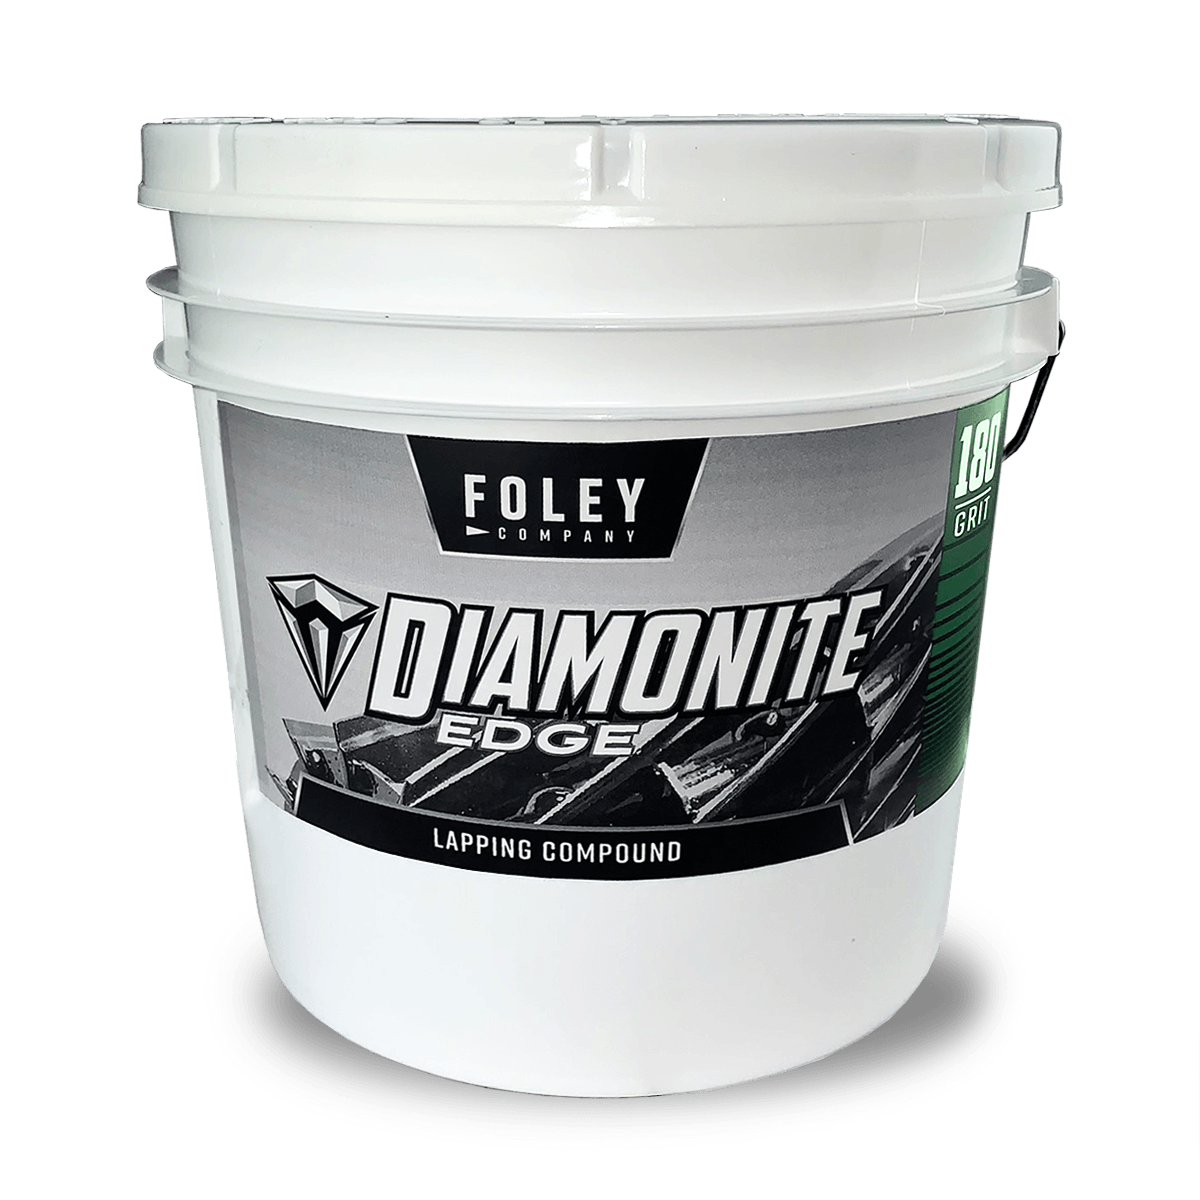 Reel Mower Lapping Compound - 80 Grit